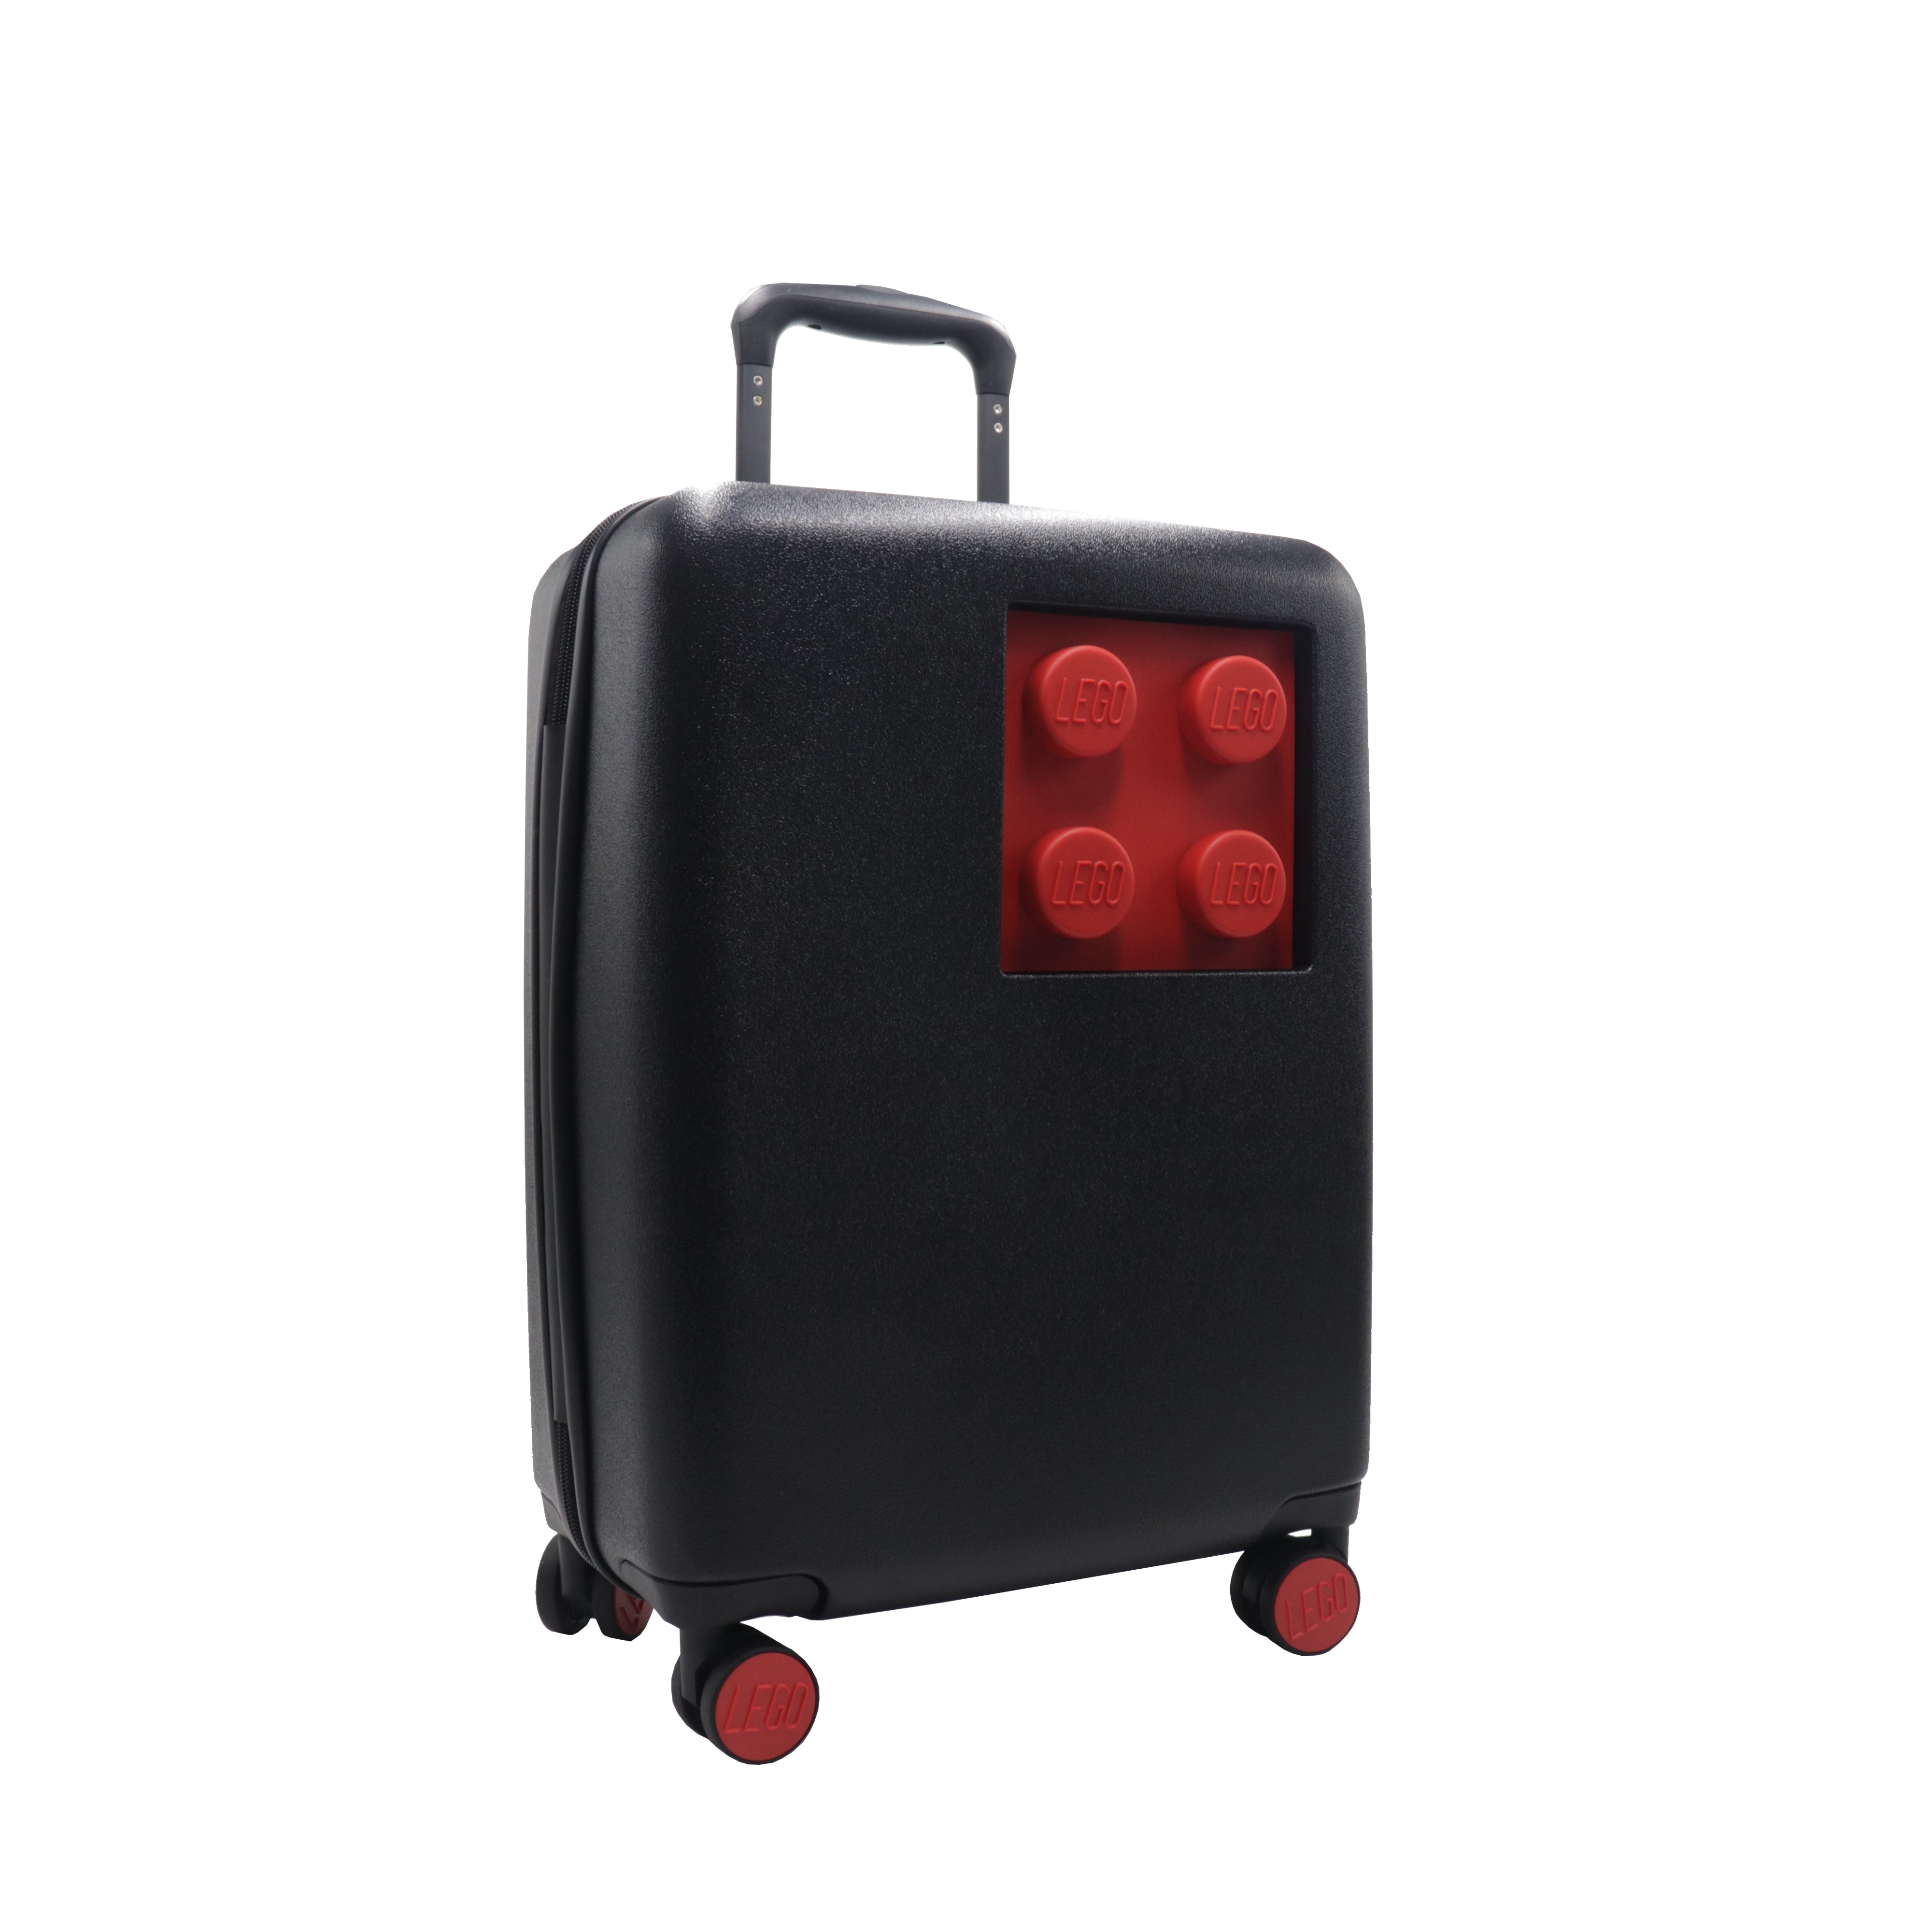 Lego Trolley Brick 2x2 S Black and Red